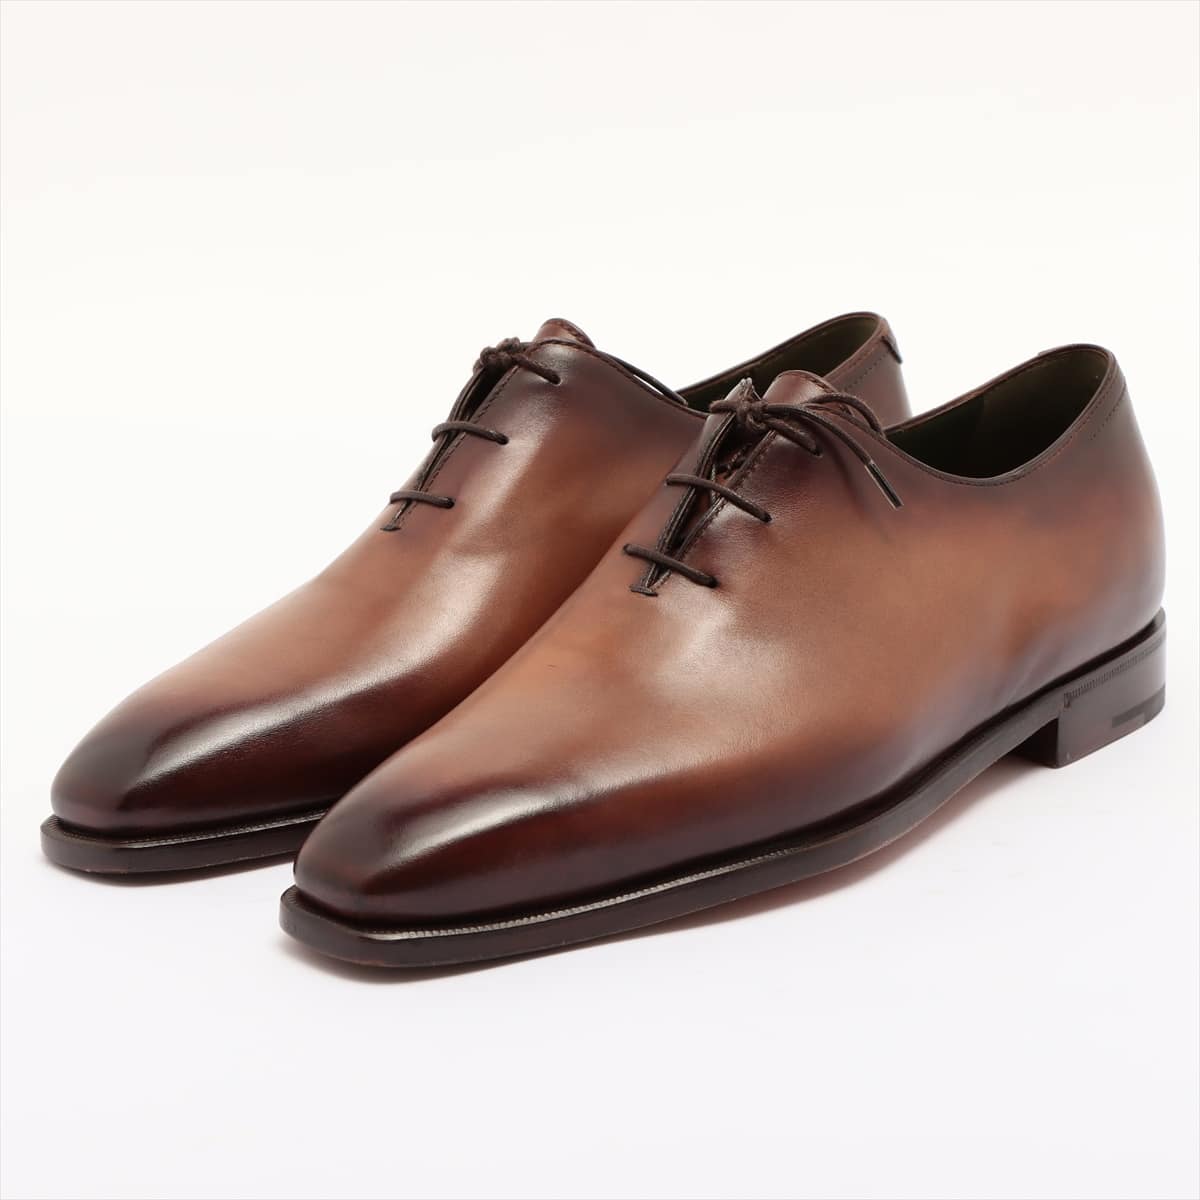 Berluti Alessandro Leather Leather shoes 6 Men's Brown With genuine shoe tree